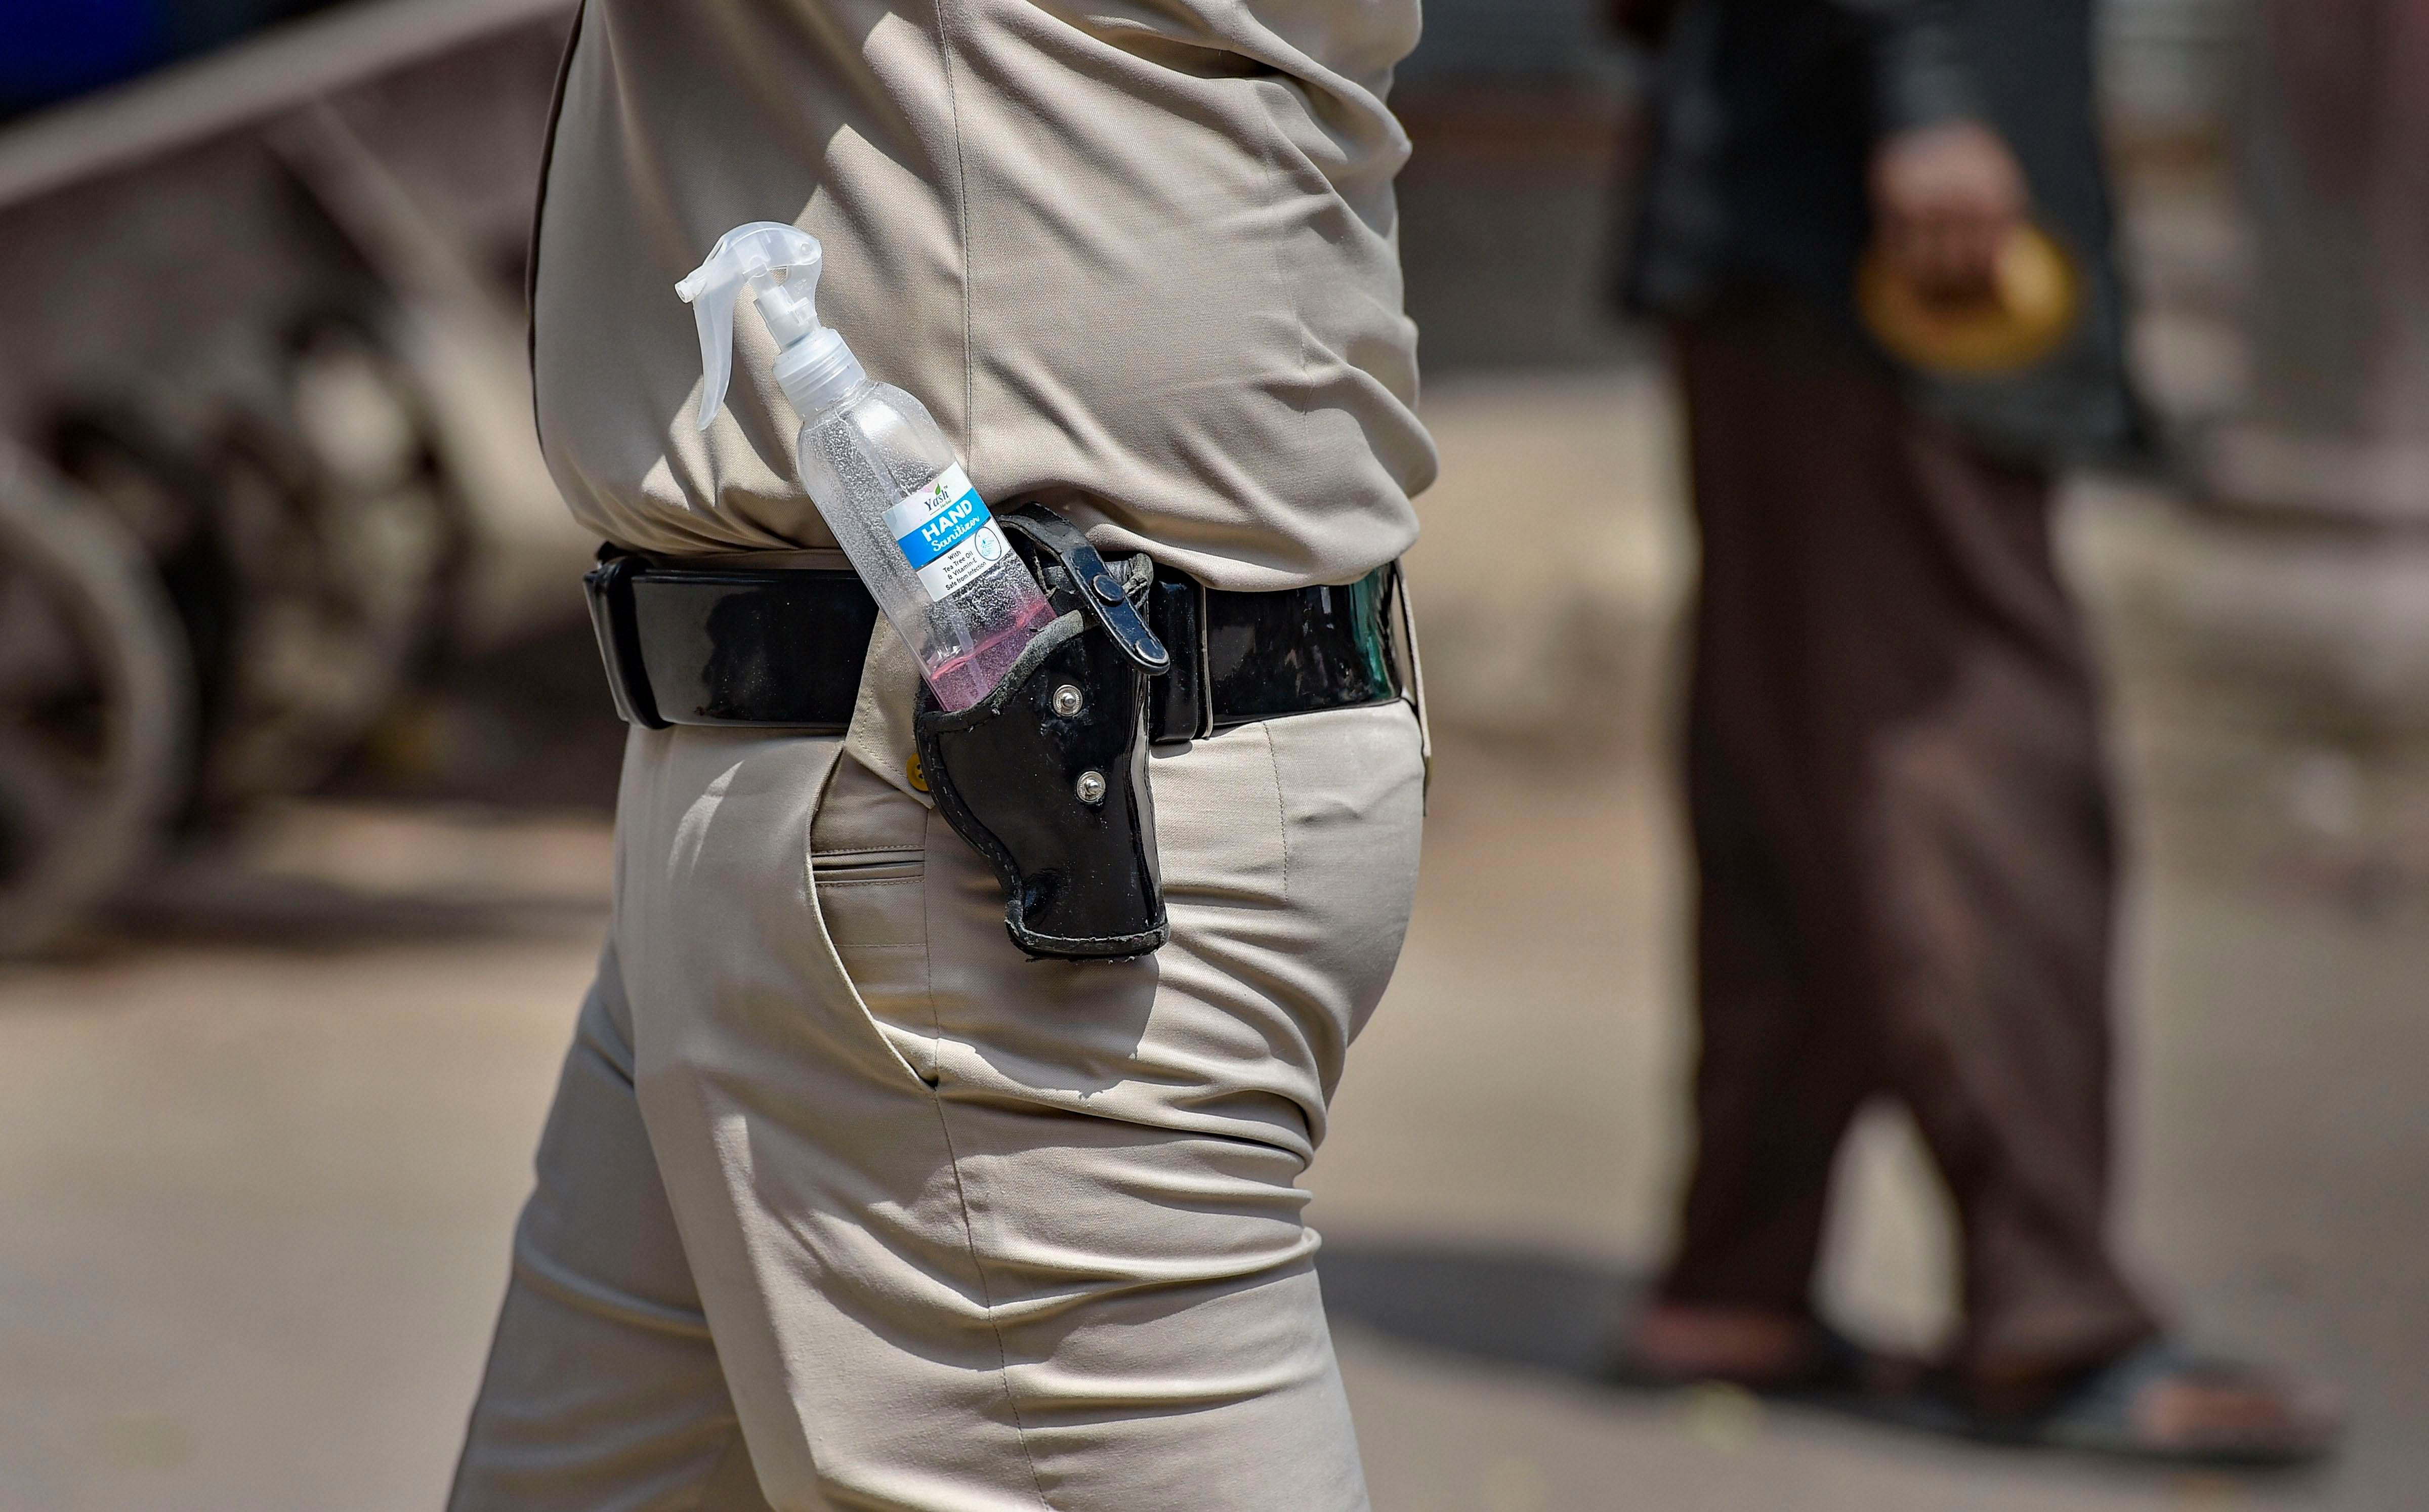  A policeman with a hand sanitiser in his gun belt manages proceedings as homeless people stand in a queue for food, during a nationwide lockdown. Credit: PTI Photo